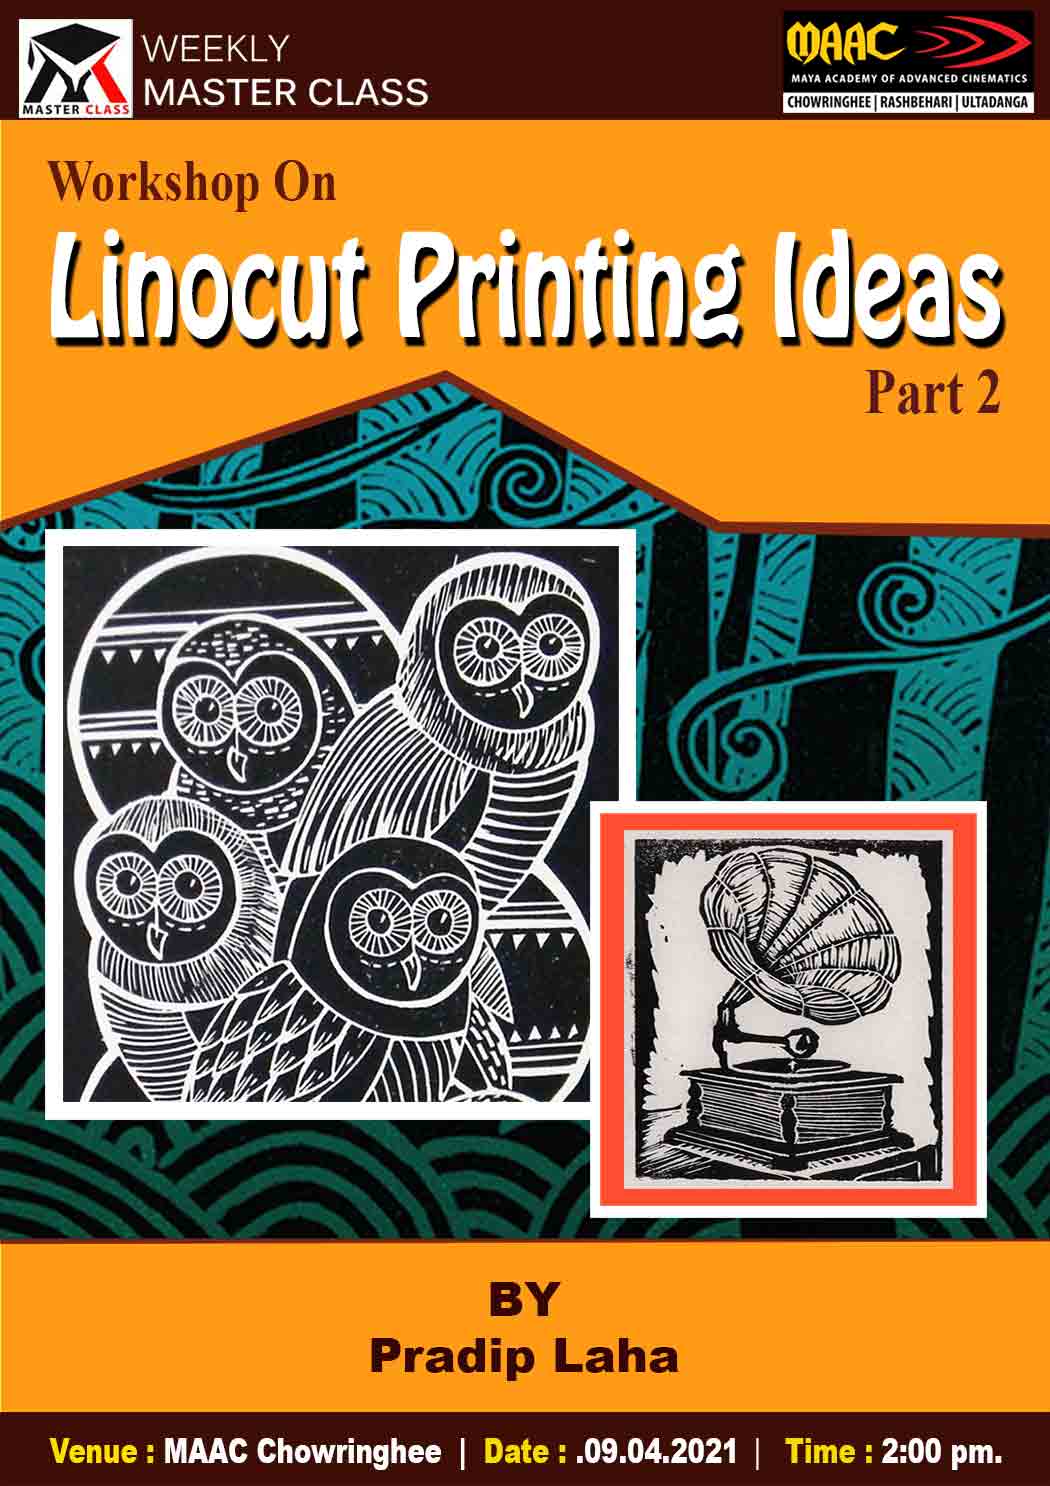 Weekly Master Class on Linocut Printing Phase 2